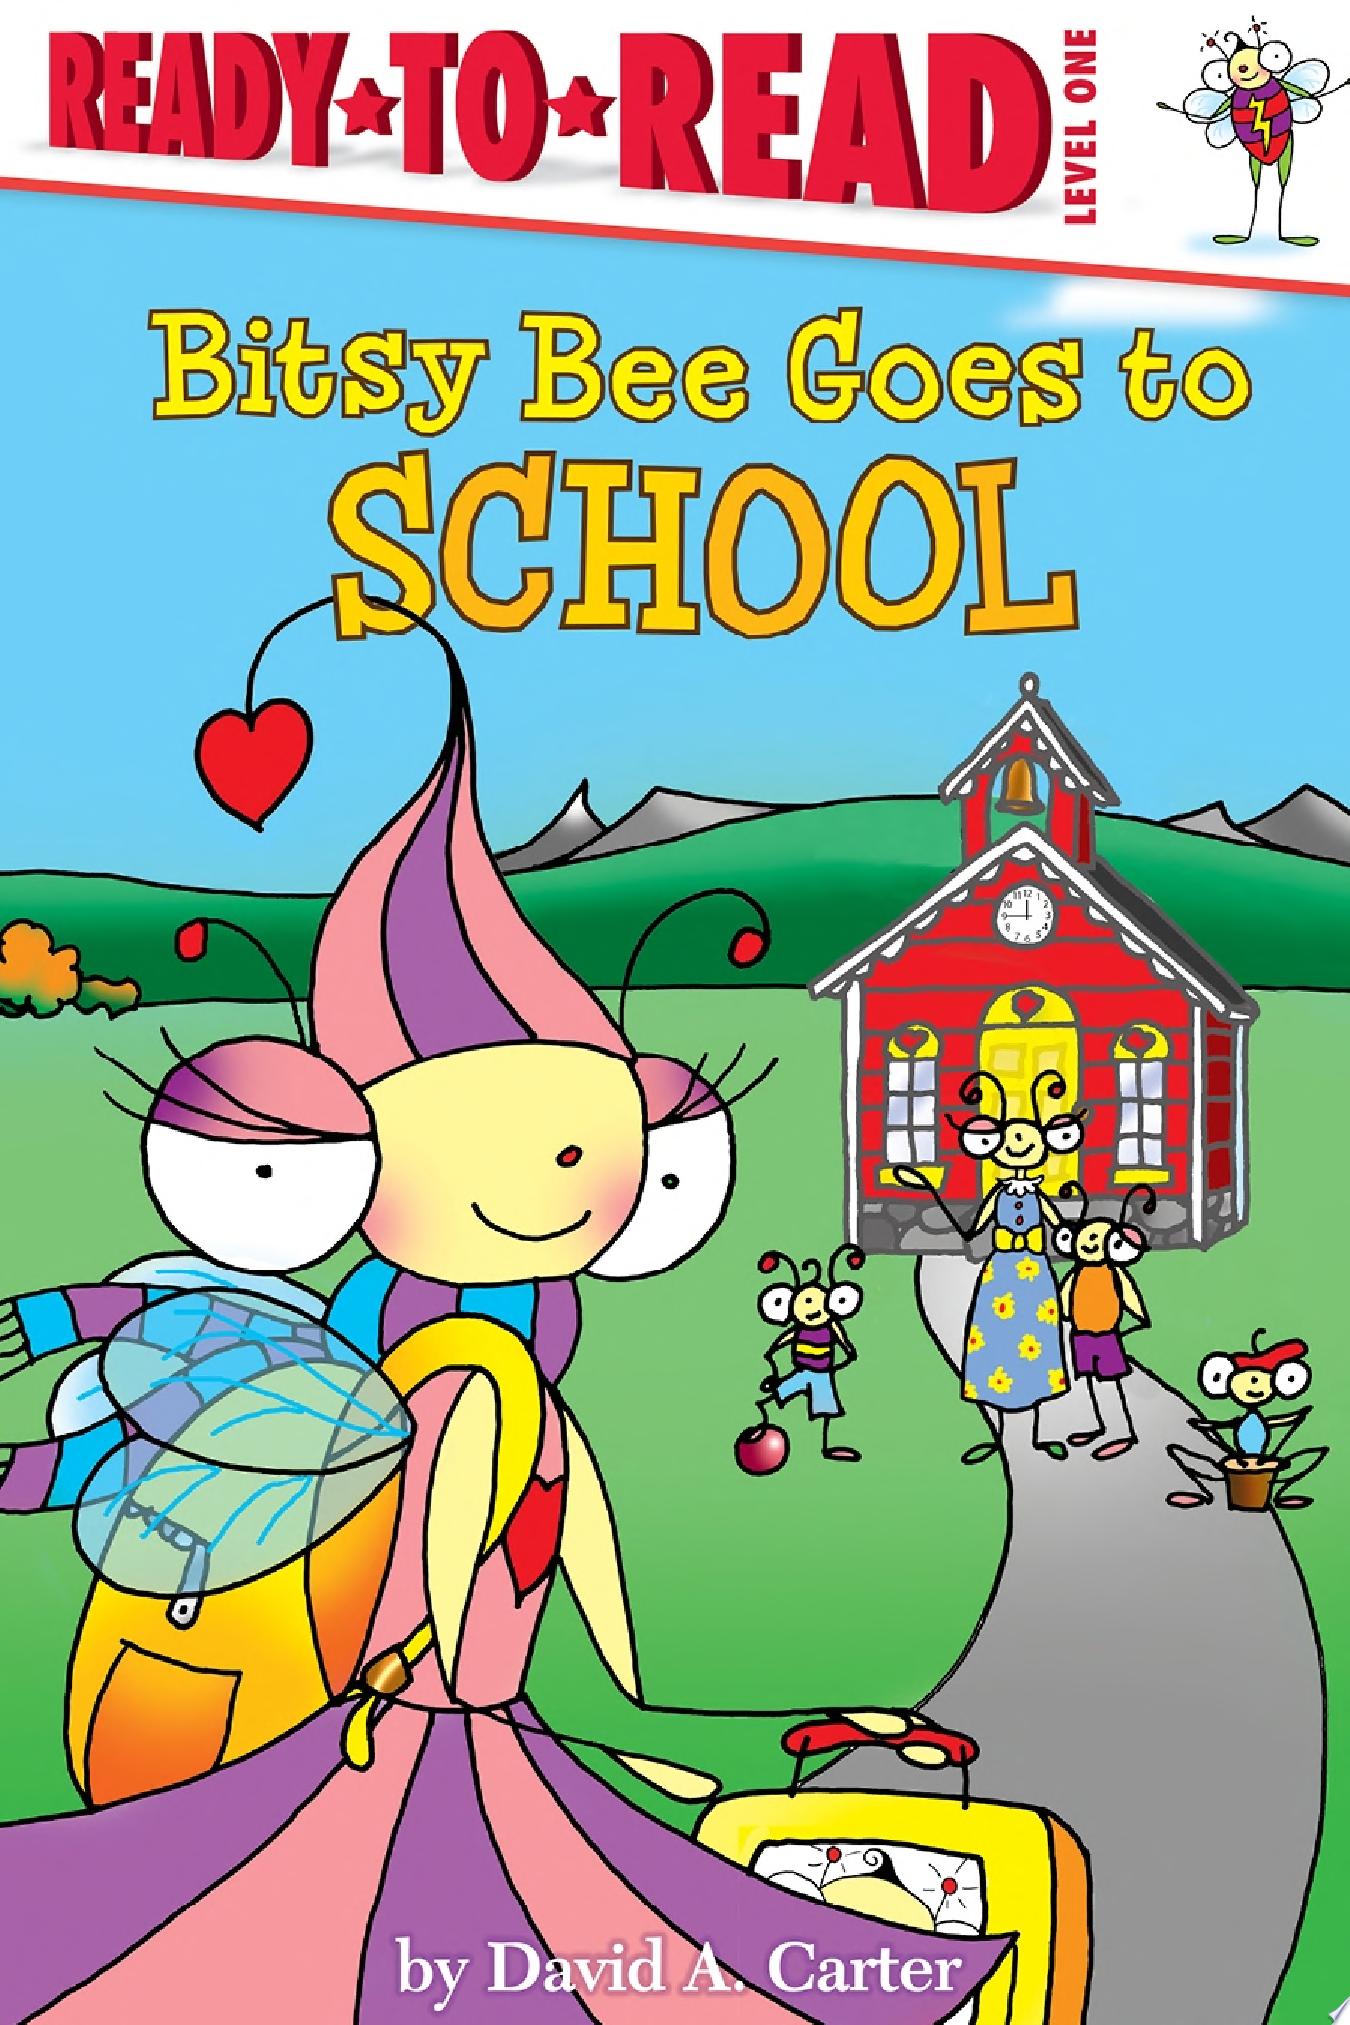 Image for "Bitsy Bee Goes to School"